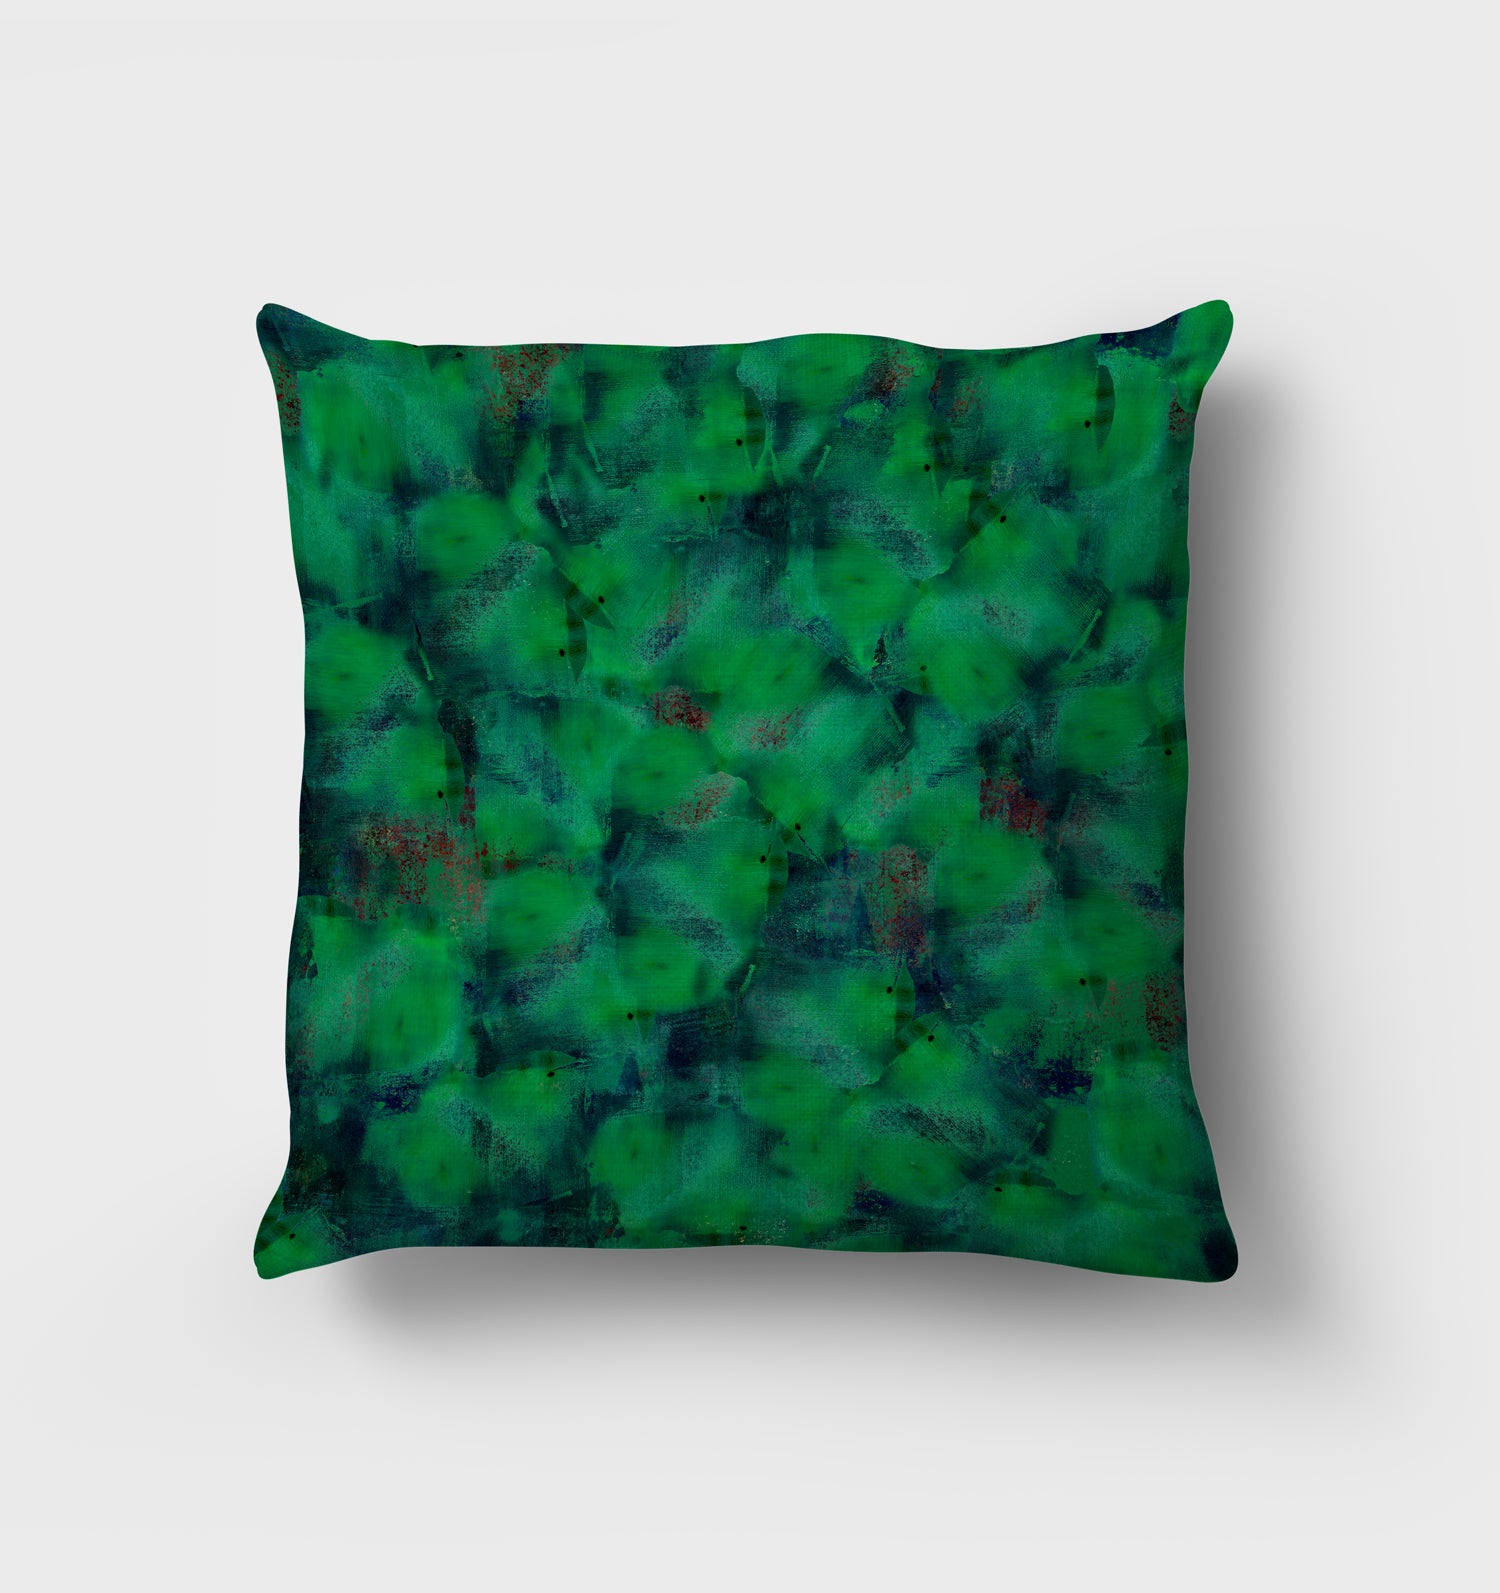 Forest Explorer Cushion. Hand printed layers of green abstract shapes to reveal a lushous moss like effect.